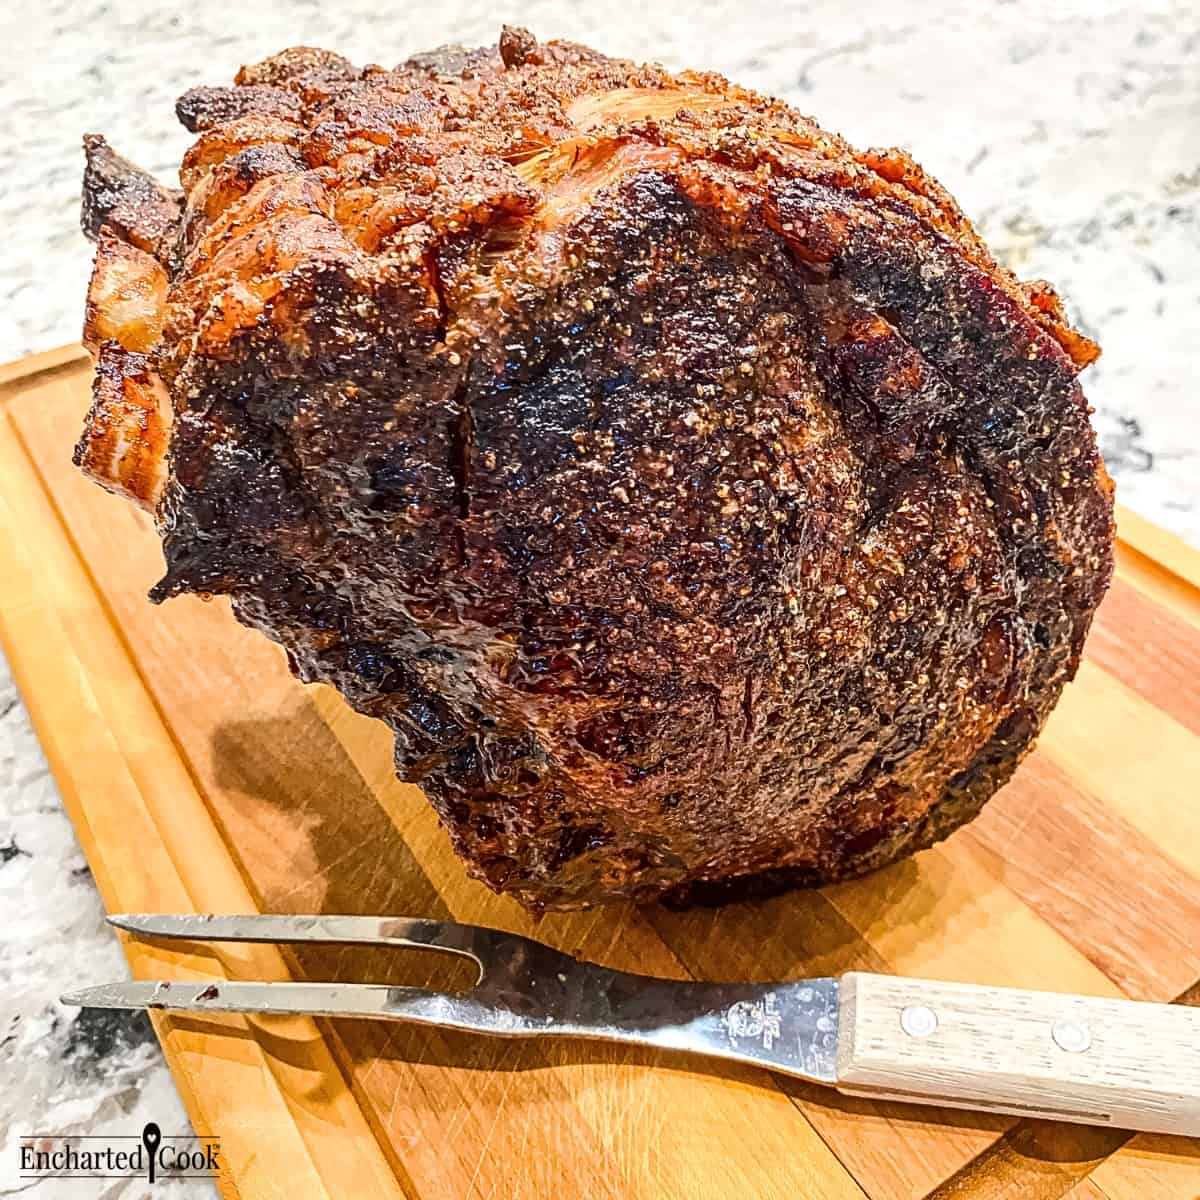 A beautifully cooked standing rib roast standing on end on a wooden carving board.